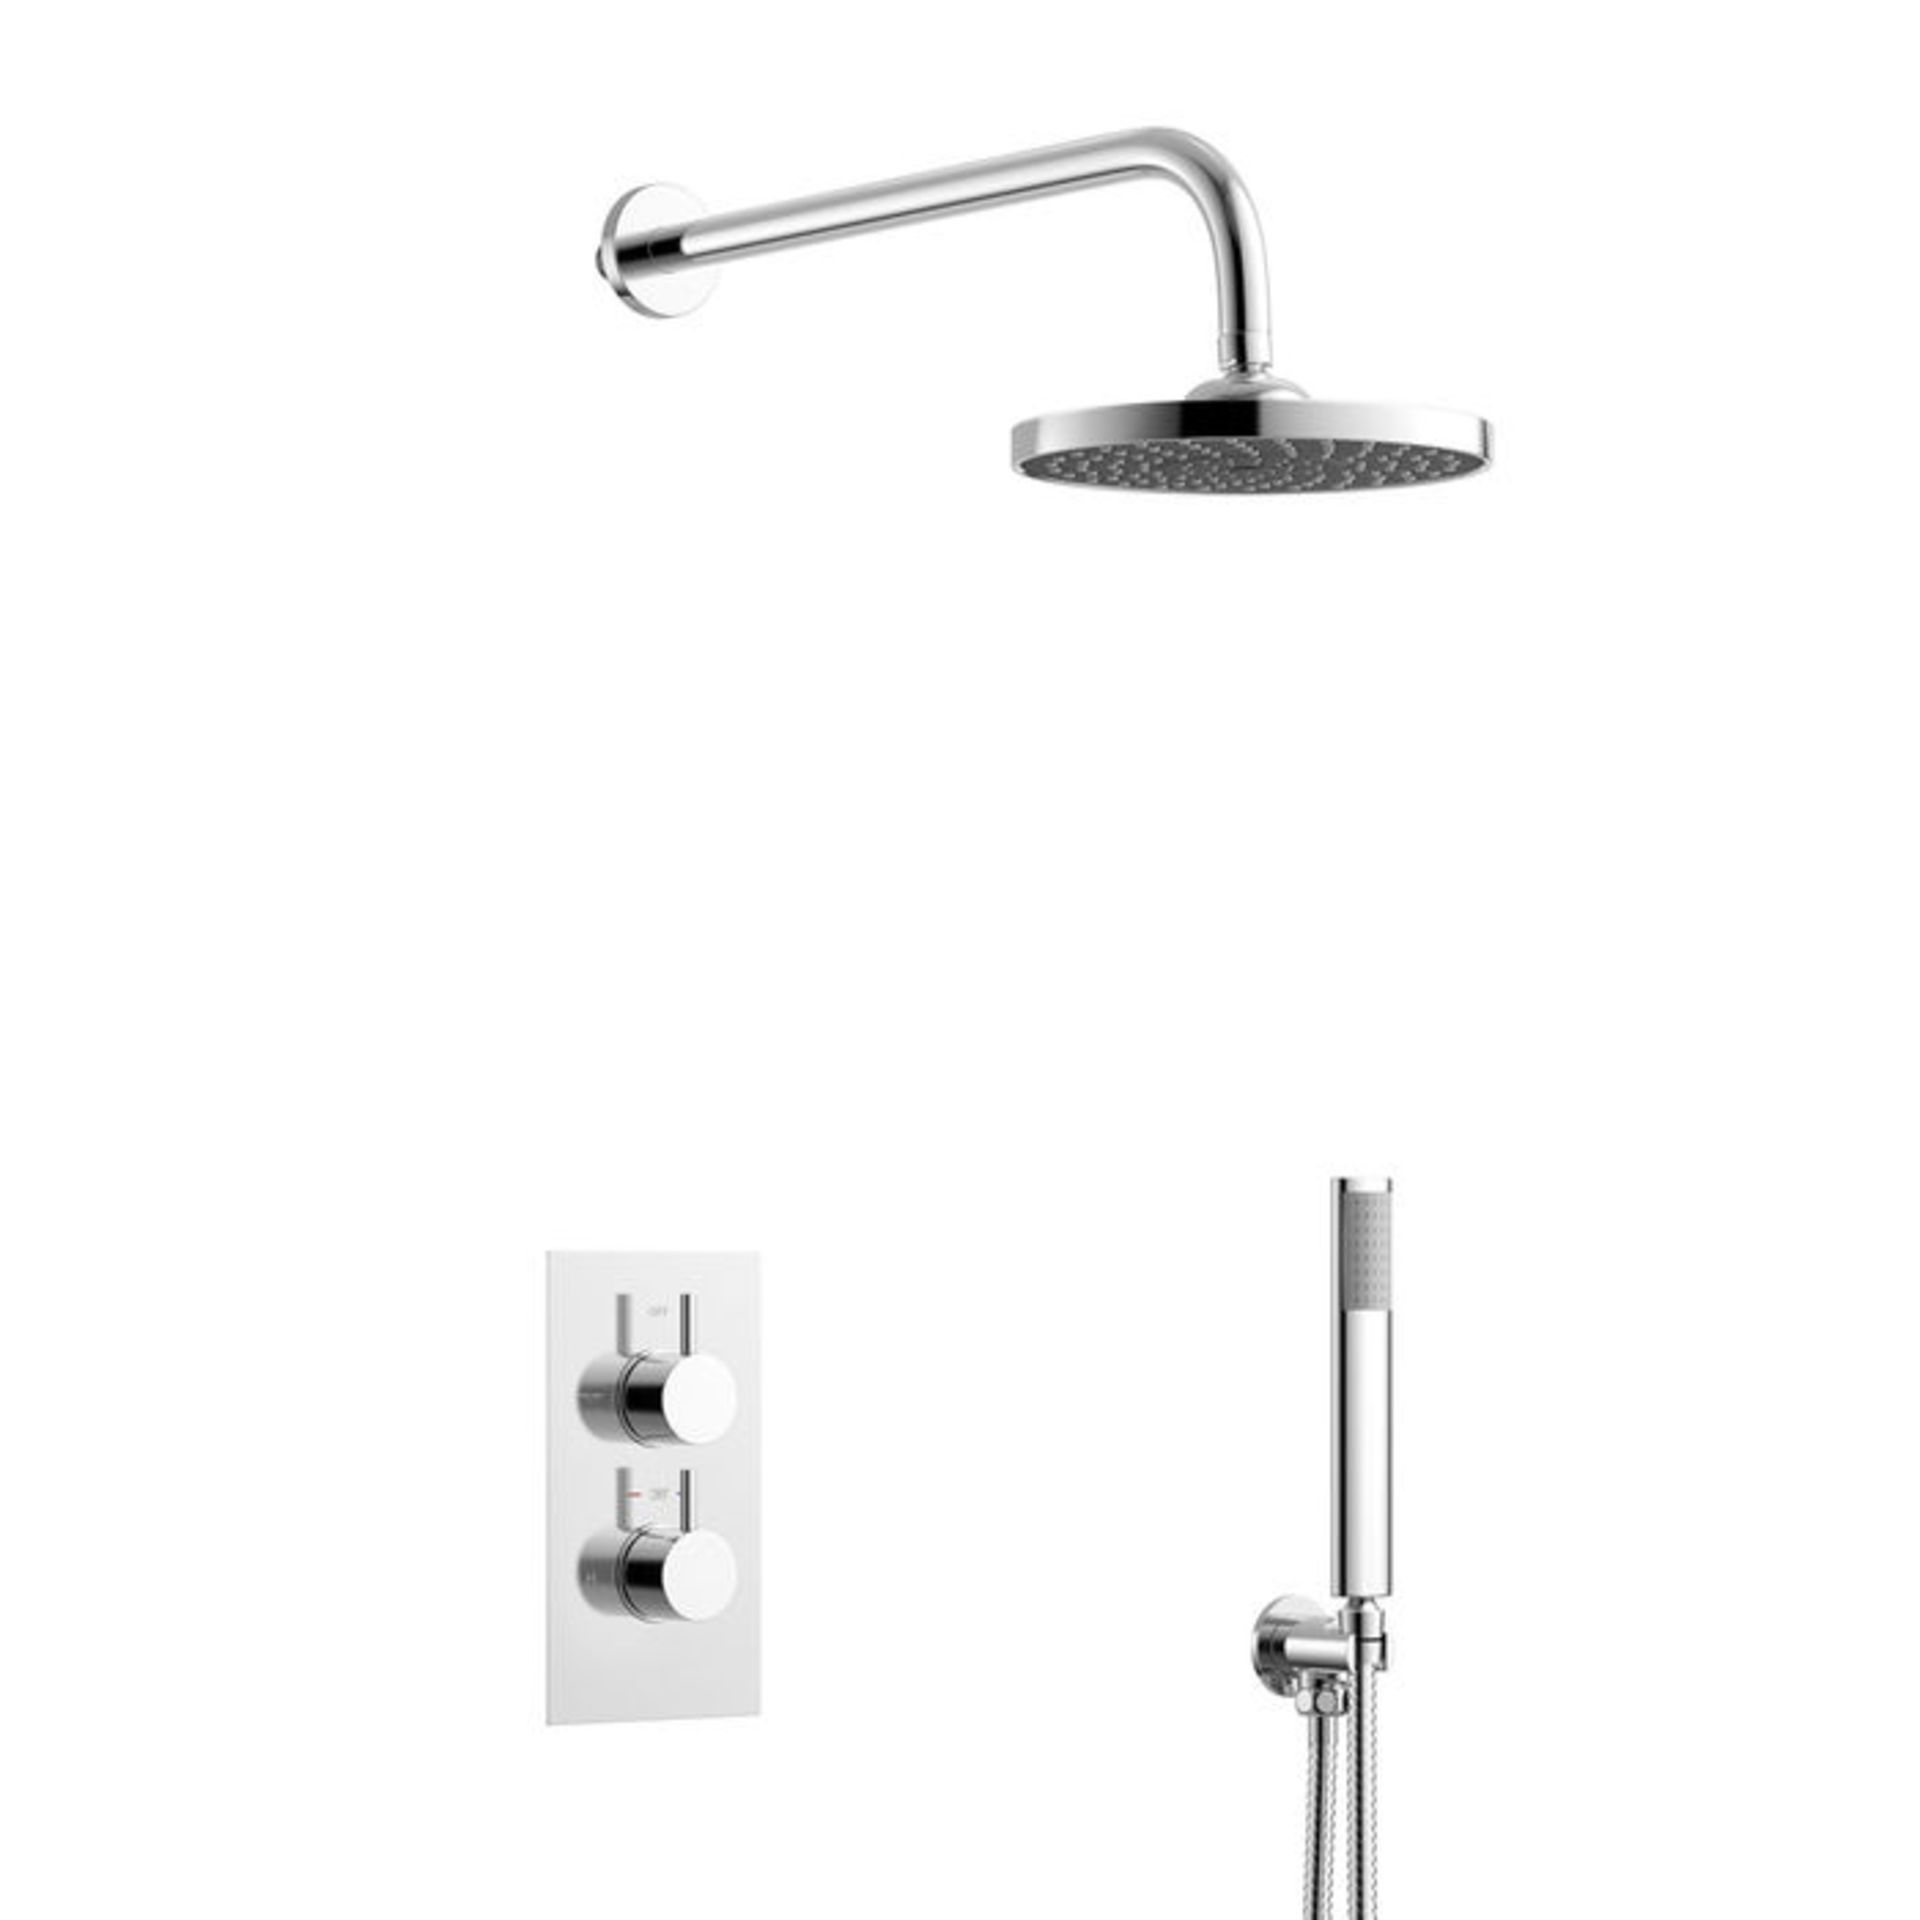 (OS32) Round Concealed Thermostatic Mixer Shower Kit & Medium Head. Family friendly detachable - Image 4 of 4